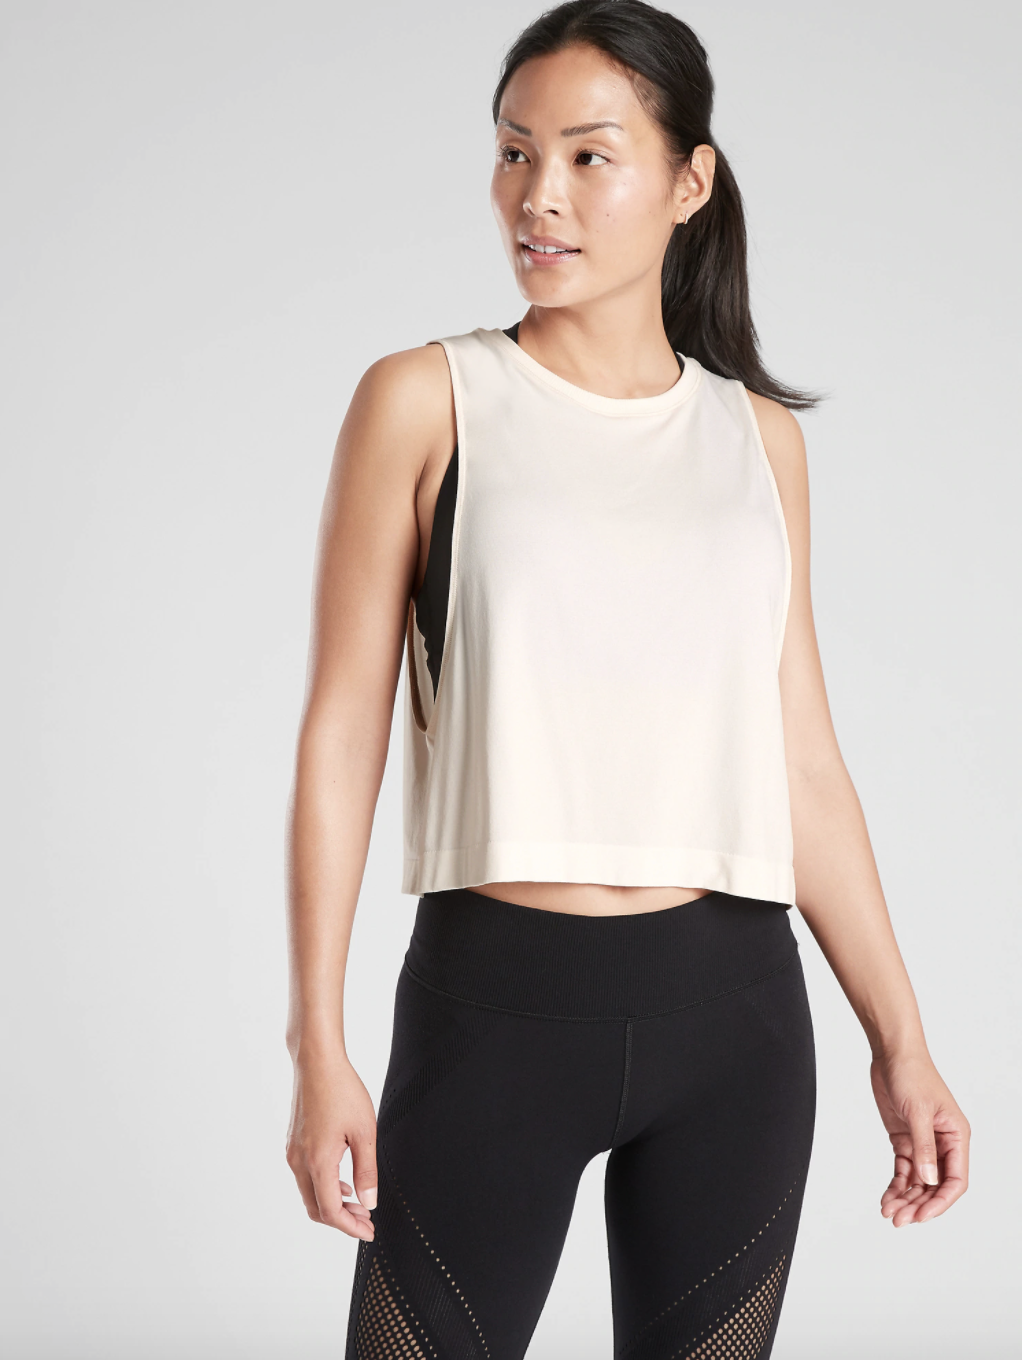 A model wearing the tank top, which stops above the waist band, and has extra wide arm holes